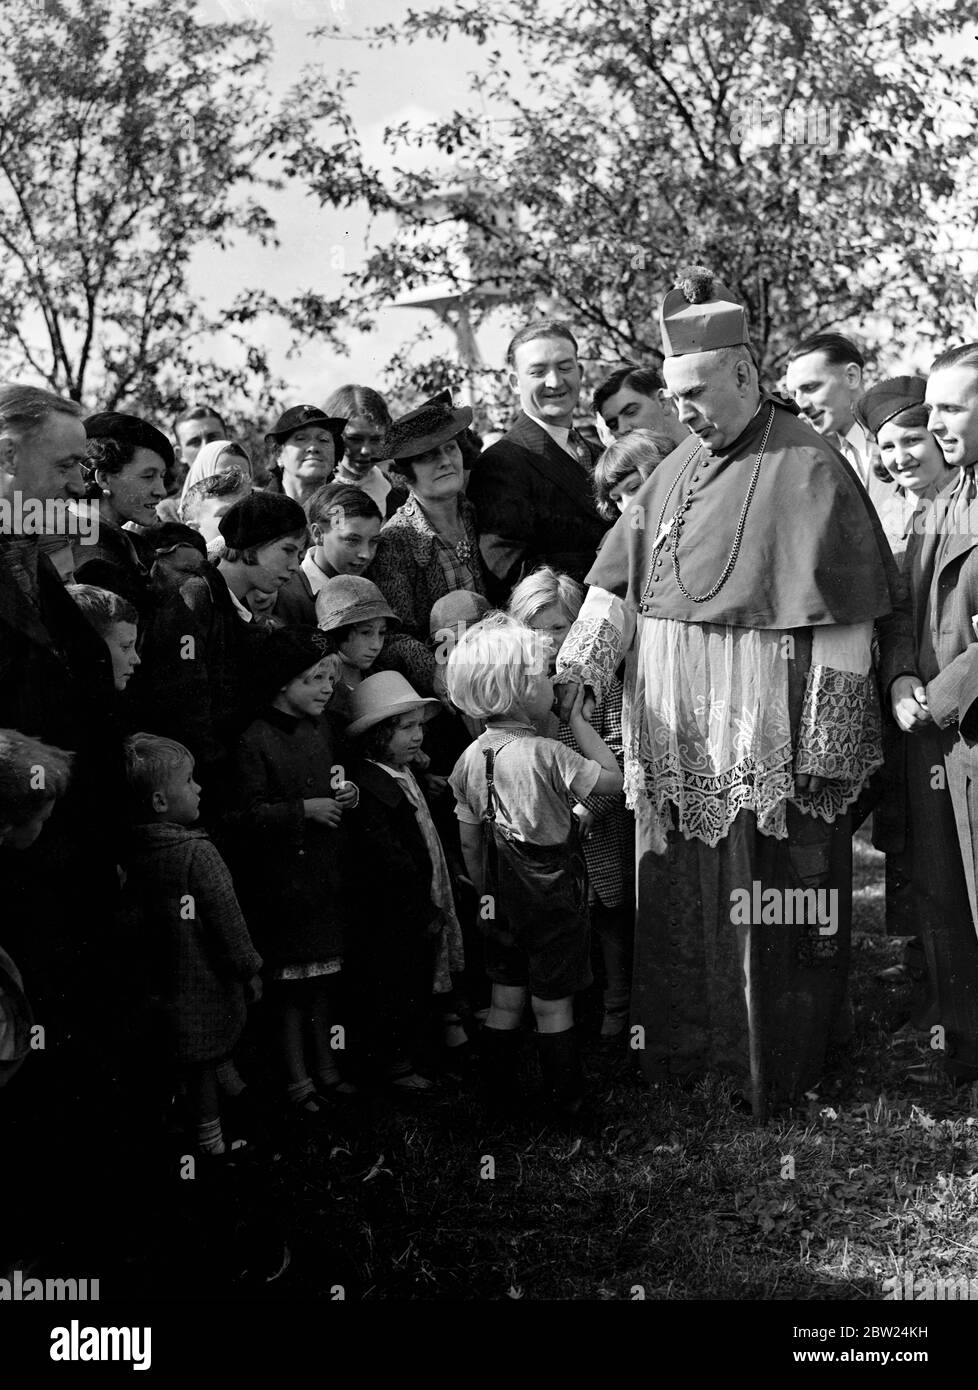 Kissing the Archbishop's ring in the hop gardens. The Archbishop Bishop of Southwark, the Rt Rev P E Amigo, made his annual visit to the Kent hop gardens today (Sunday) and celebrated a special Hop Pickers Mass at Horsmonden. Photo shows, a little girl kissing the ring of the Archbishop Bishop at Horsmonden. 4 September 1938 Stock Photo